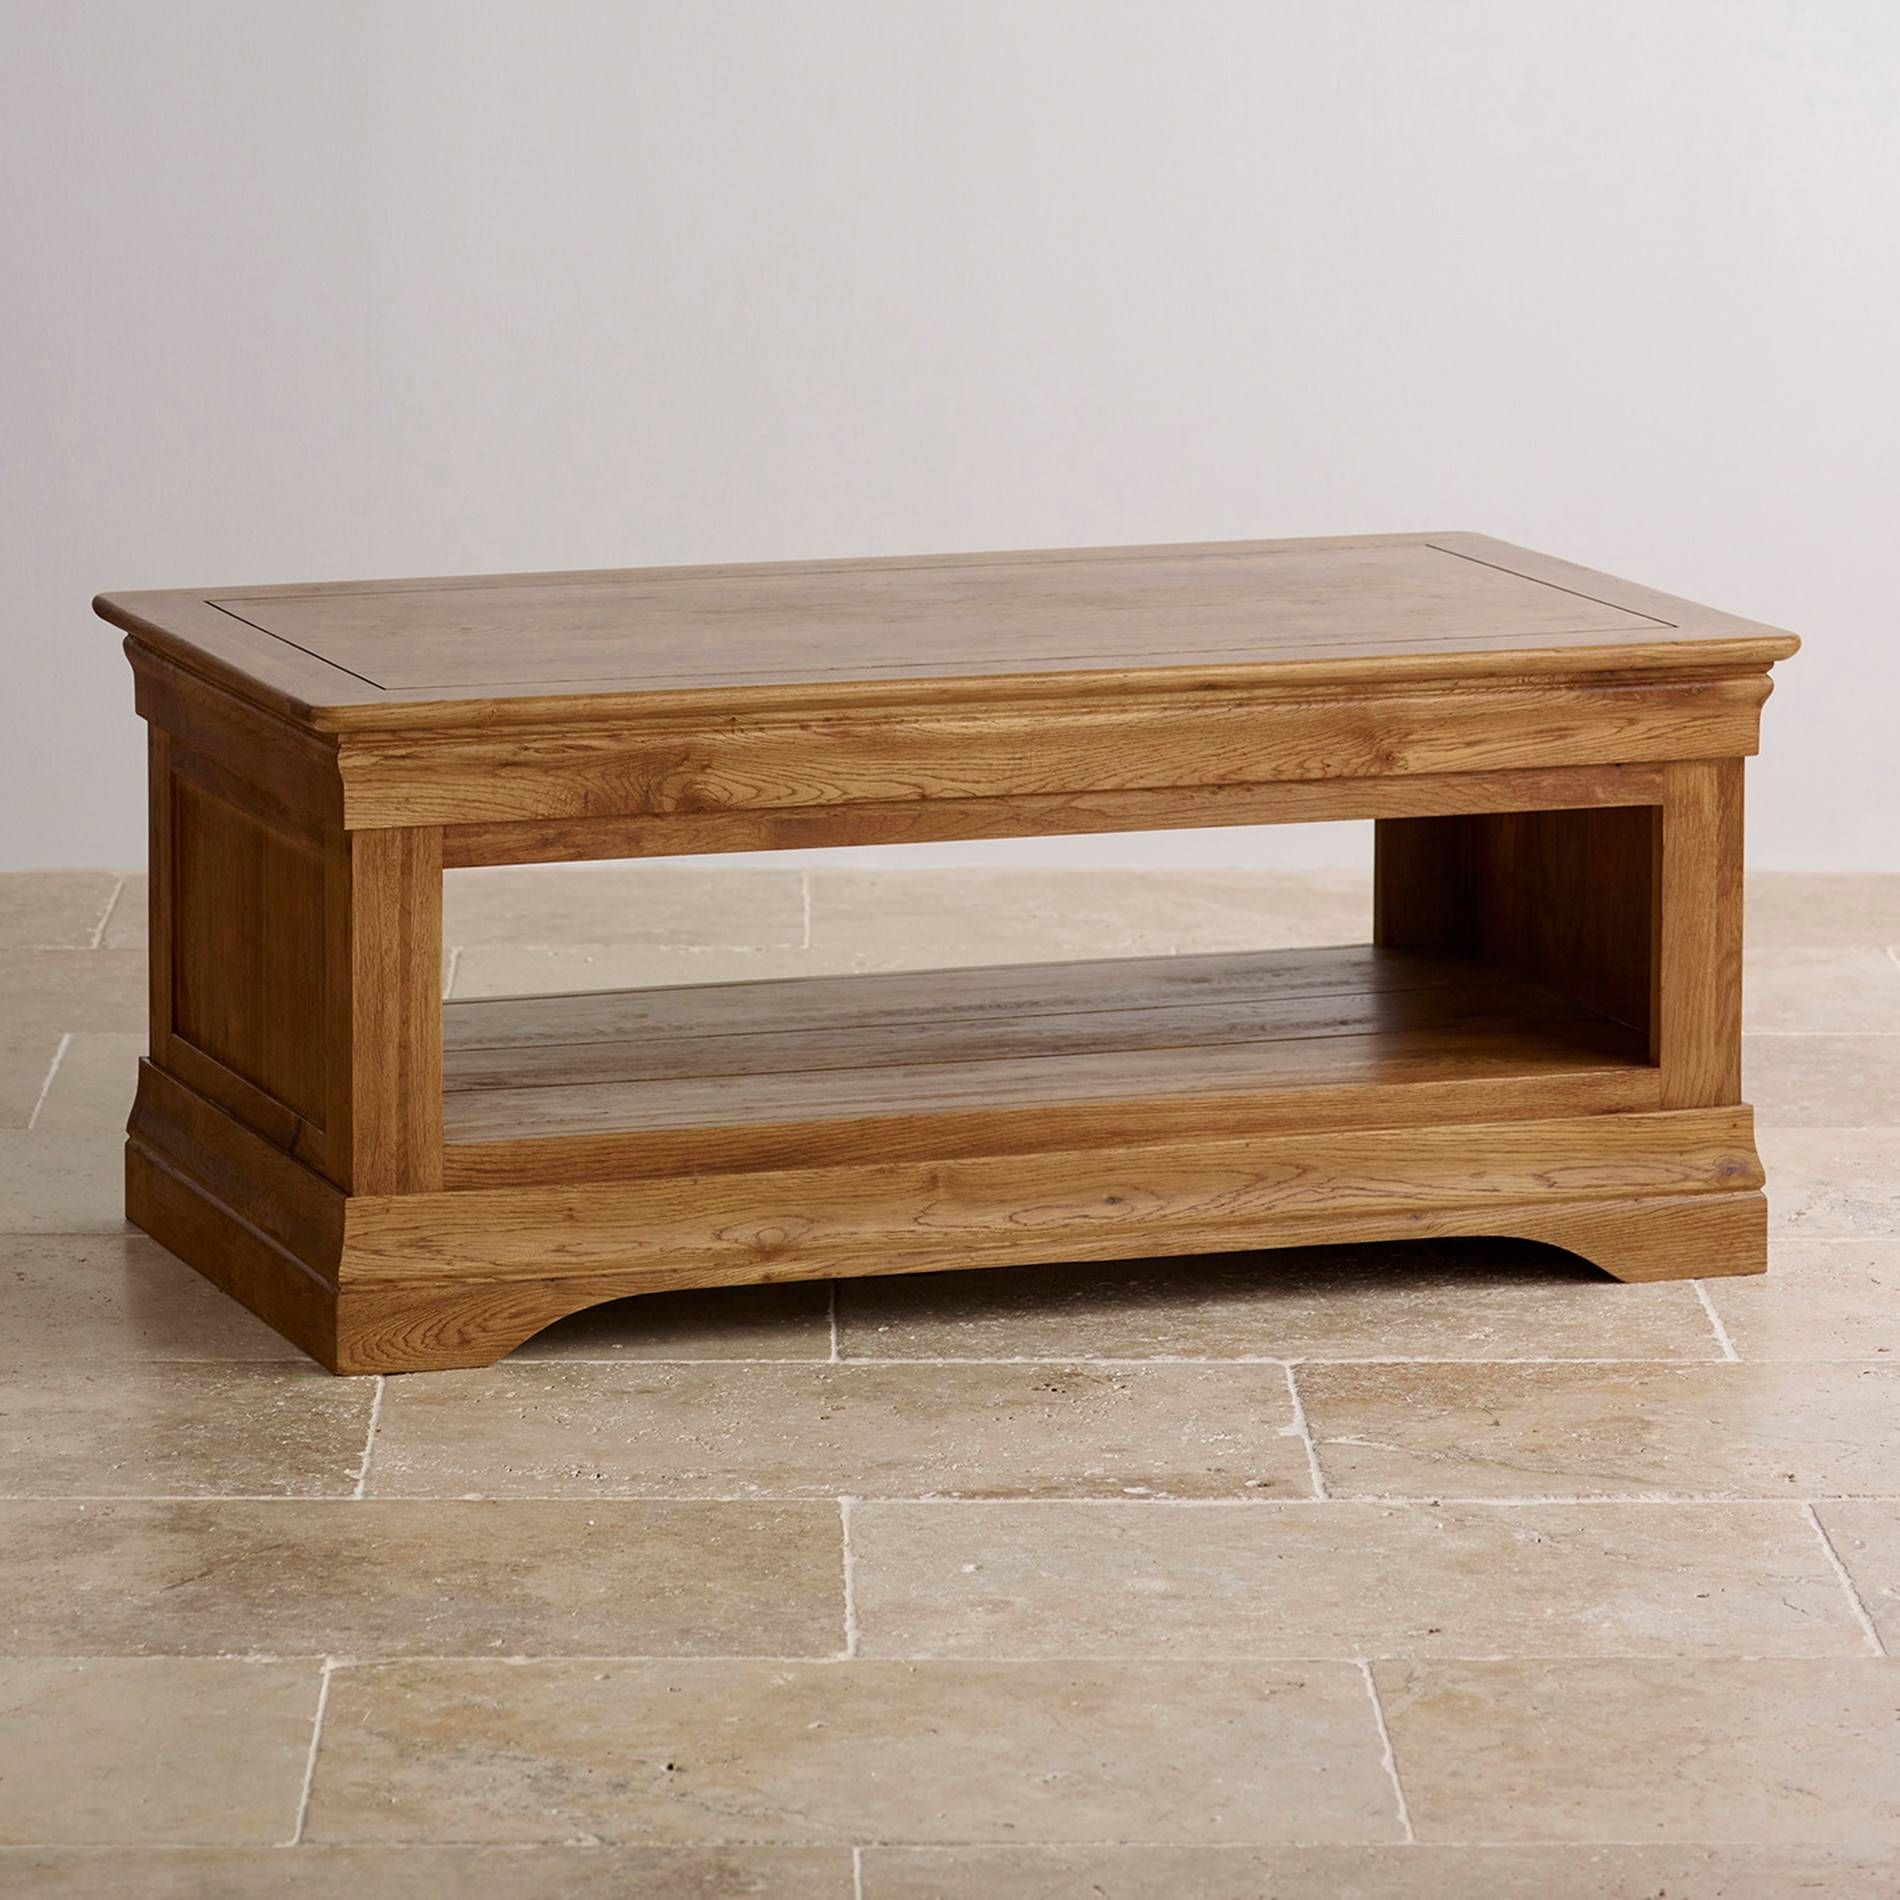 Coffee Tables: New Oak Coffee Tables Designs Rustic Oak Coffee For Rustic Oak Coffee Tables (View 14 of 15)